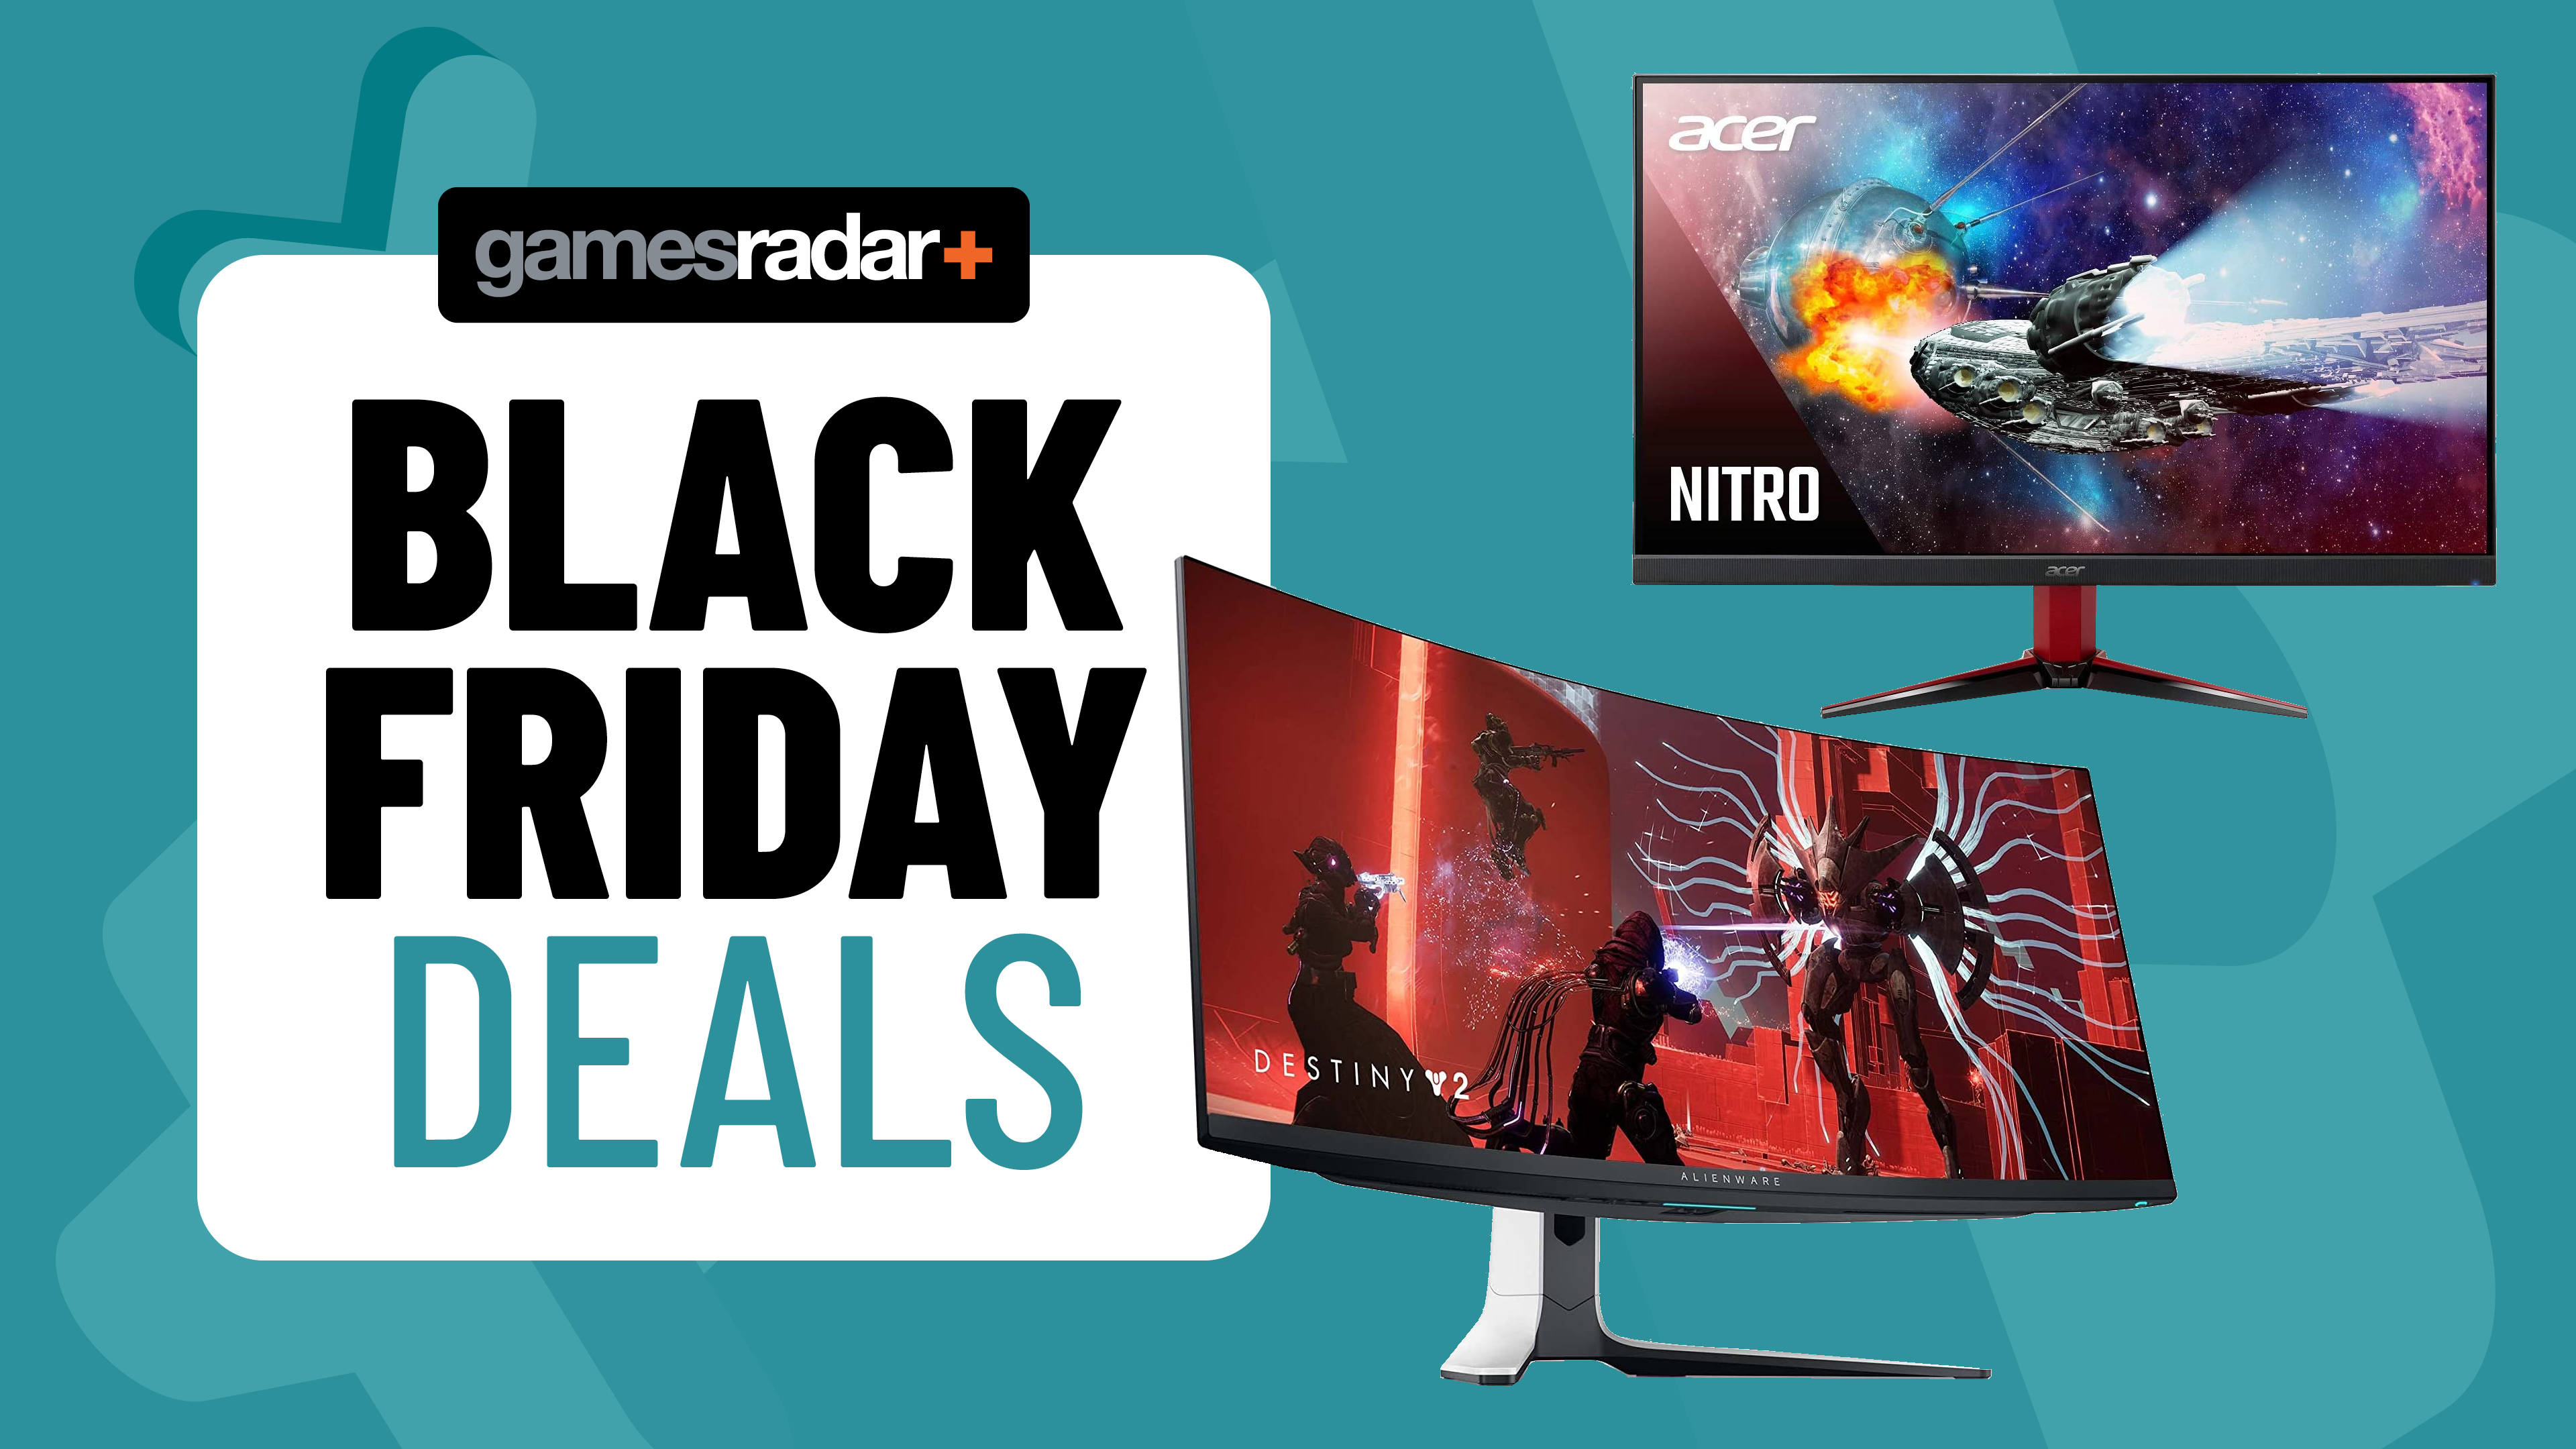 26 Best Buy Black Friday Deals 2022: TVs, Gaming, and More